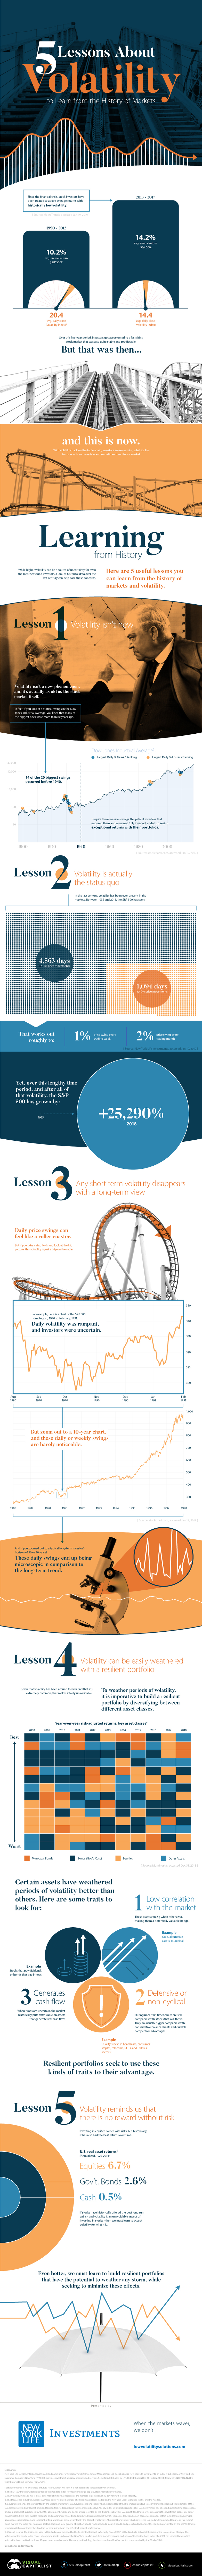 5 Lessons About Volatility to Learn From the History of Markets